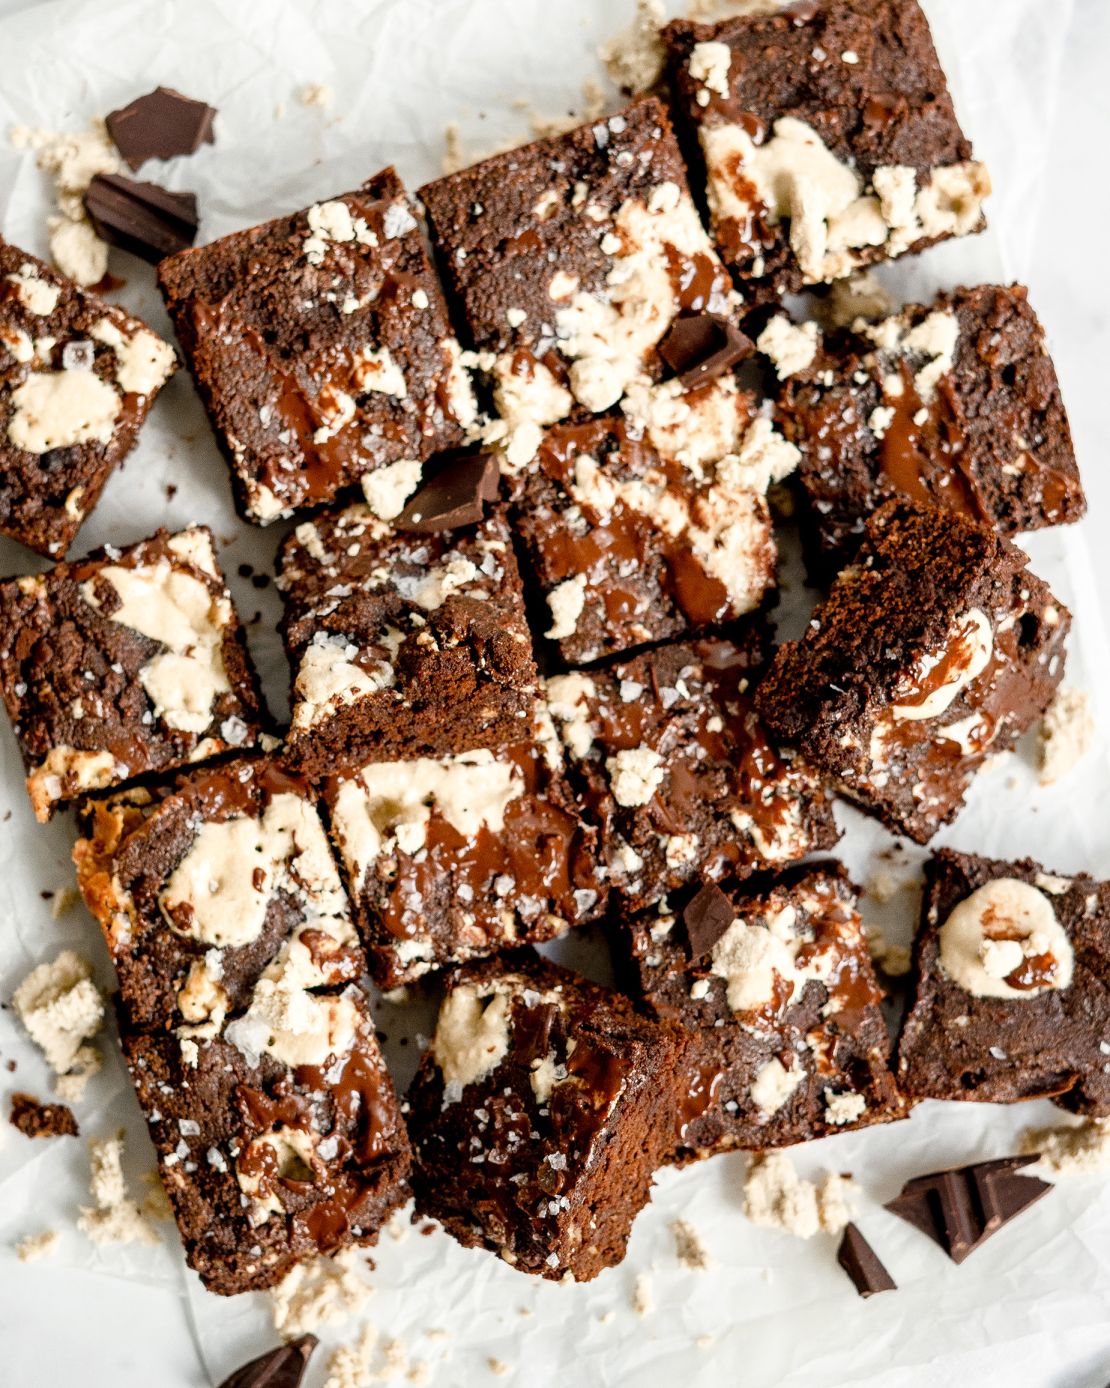 In this recipe, coconut flour and eggs help create a dense, fudgy brownie.